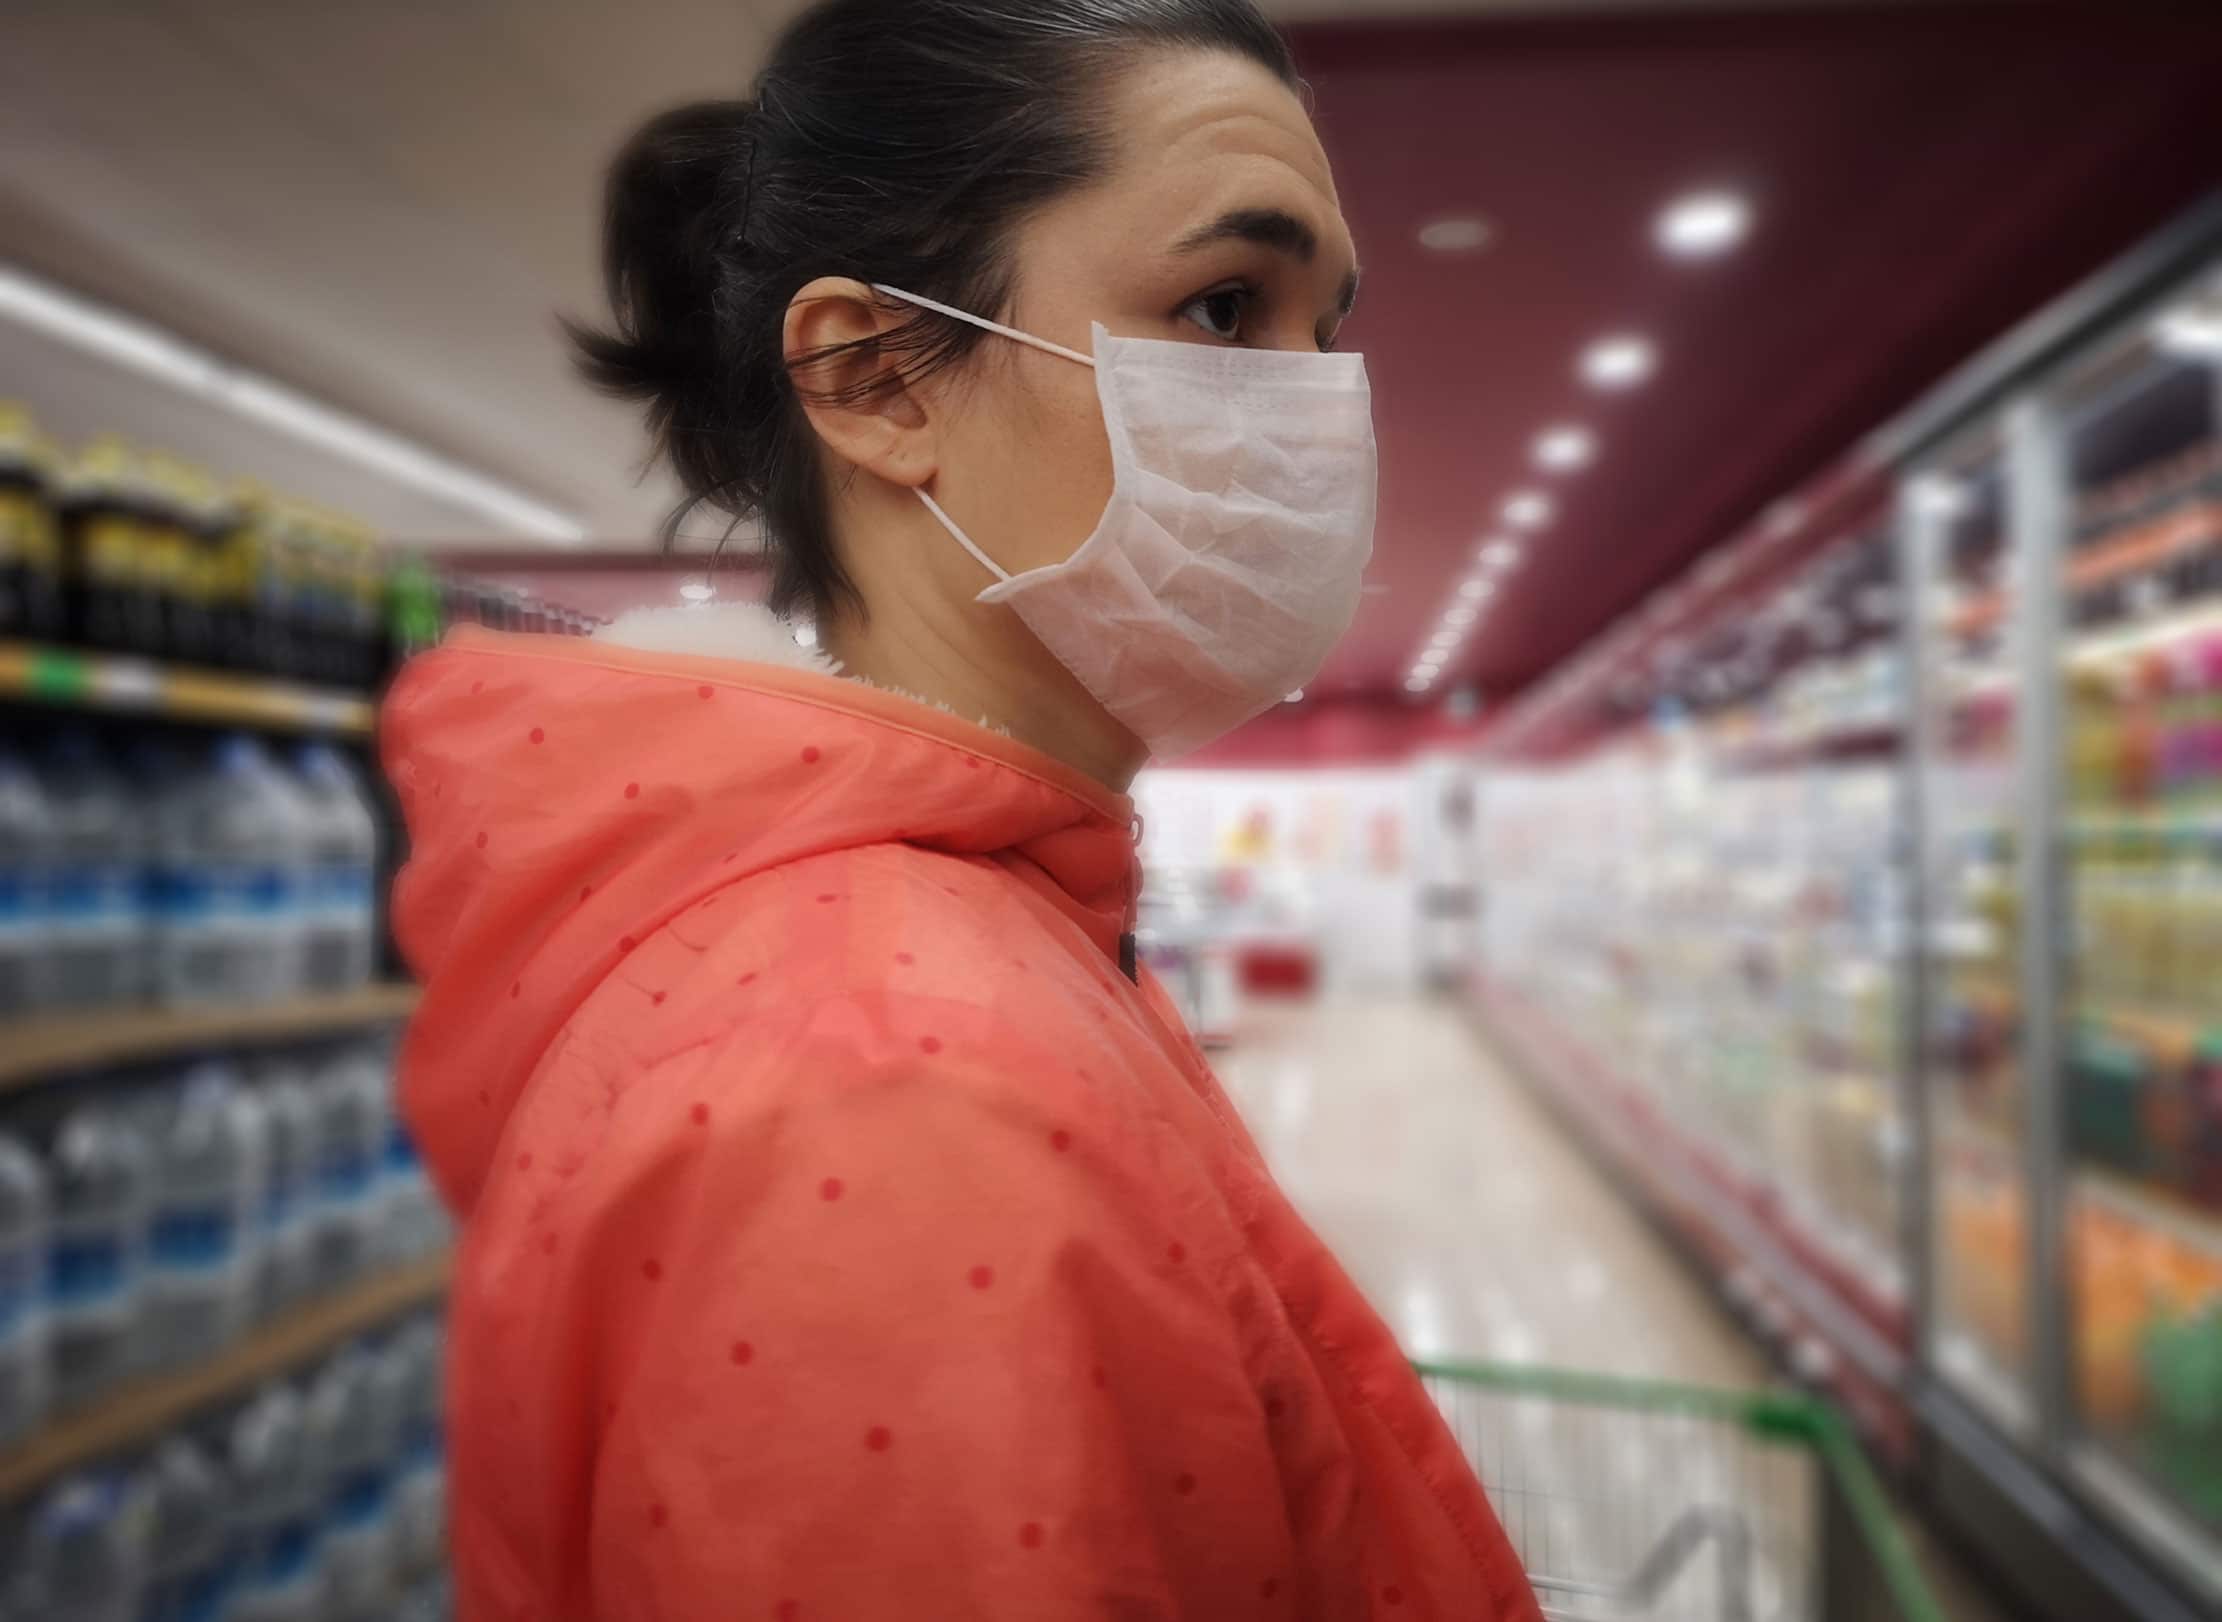 A masked person at a grocery store